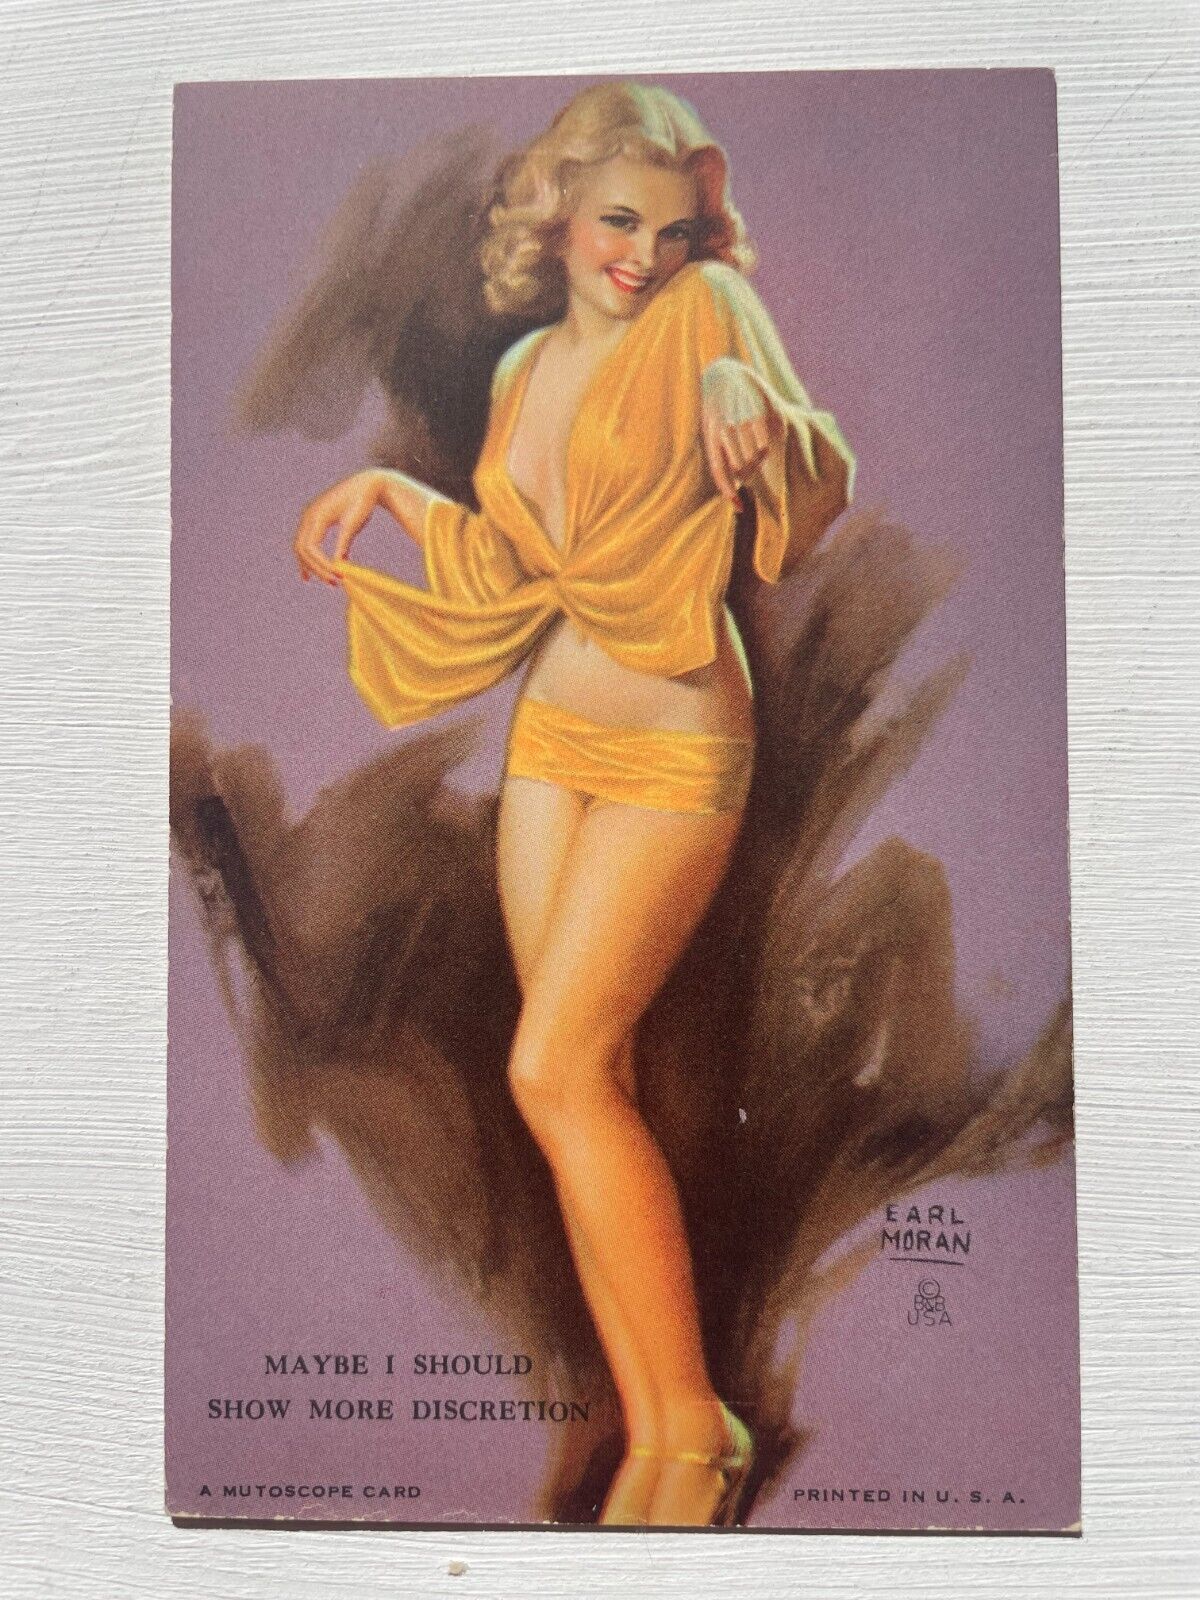 Vintage 1940's Pinup Girl Picture Mutoscope Card-Earl Moran- Show Discretion